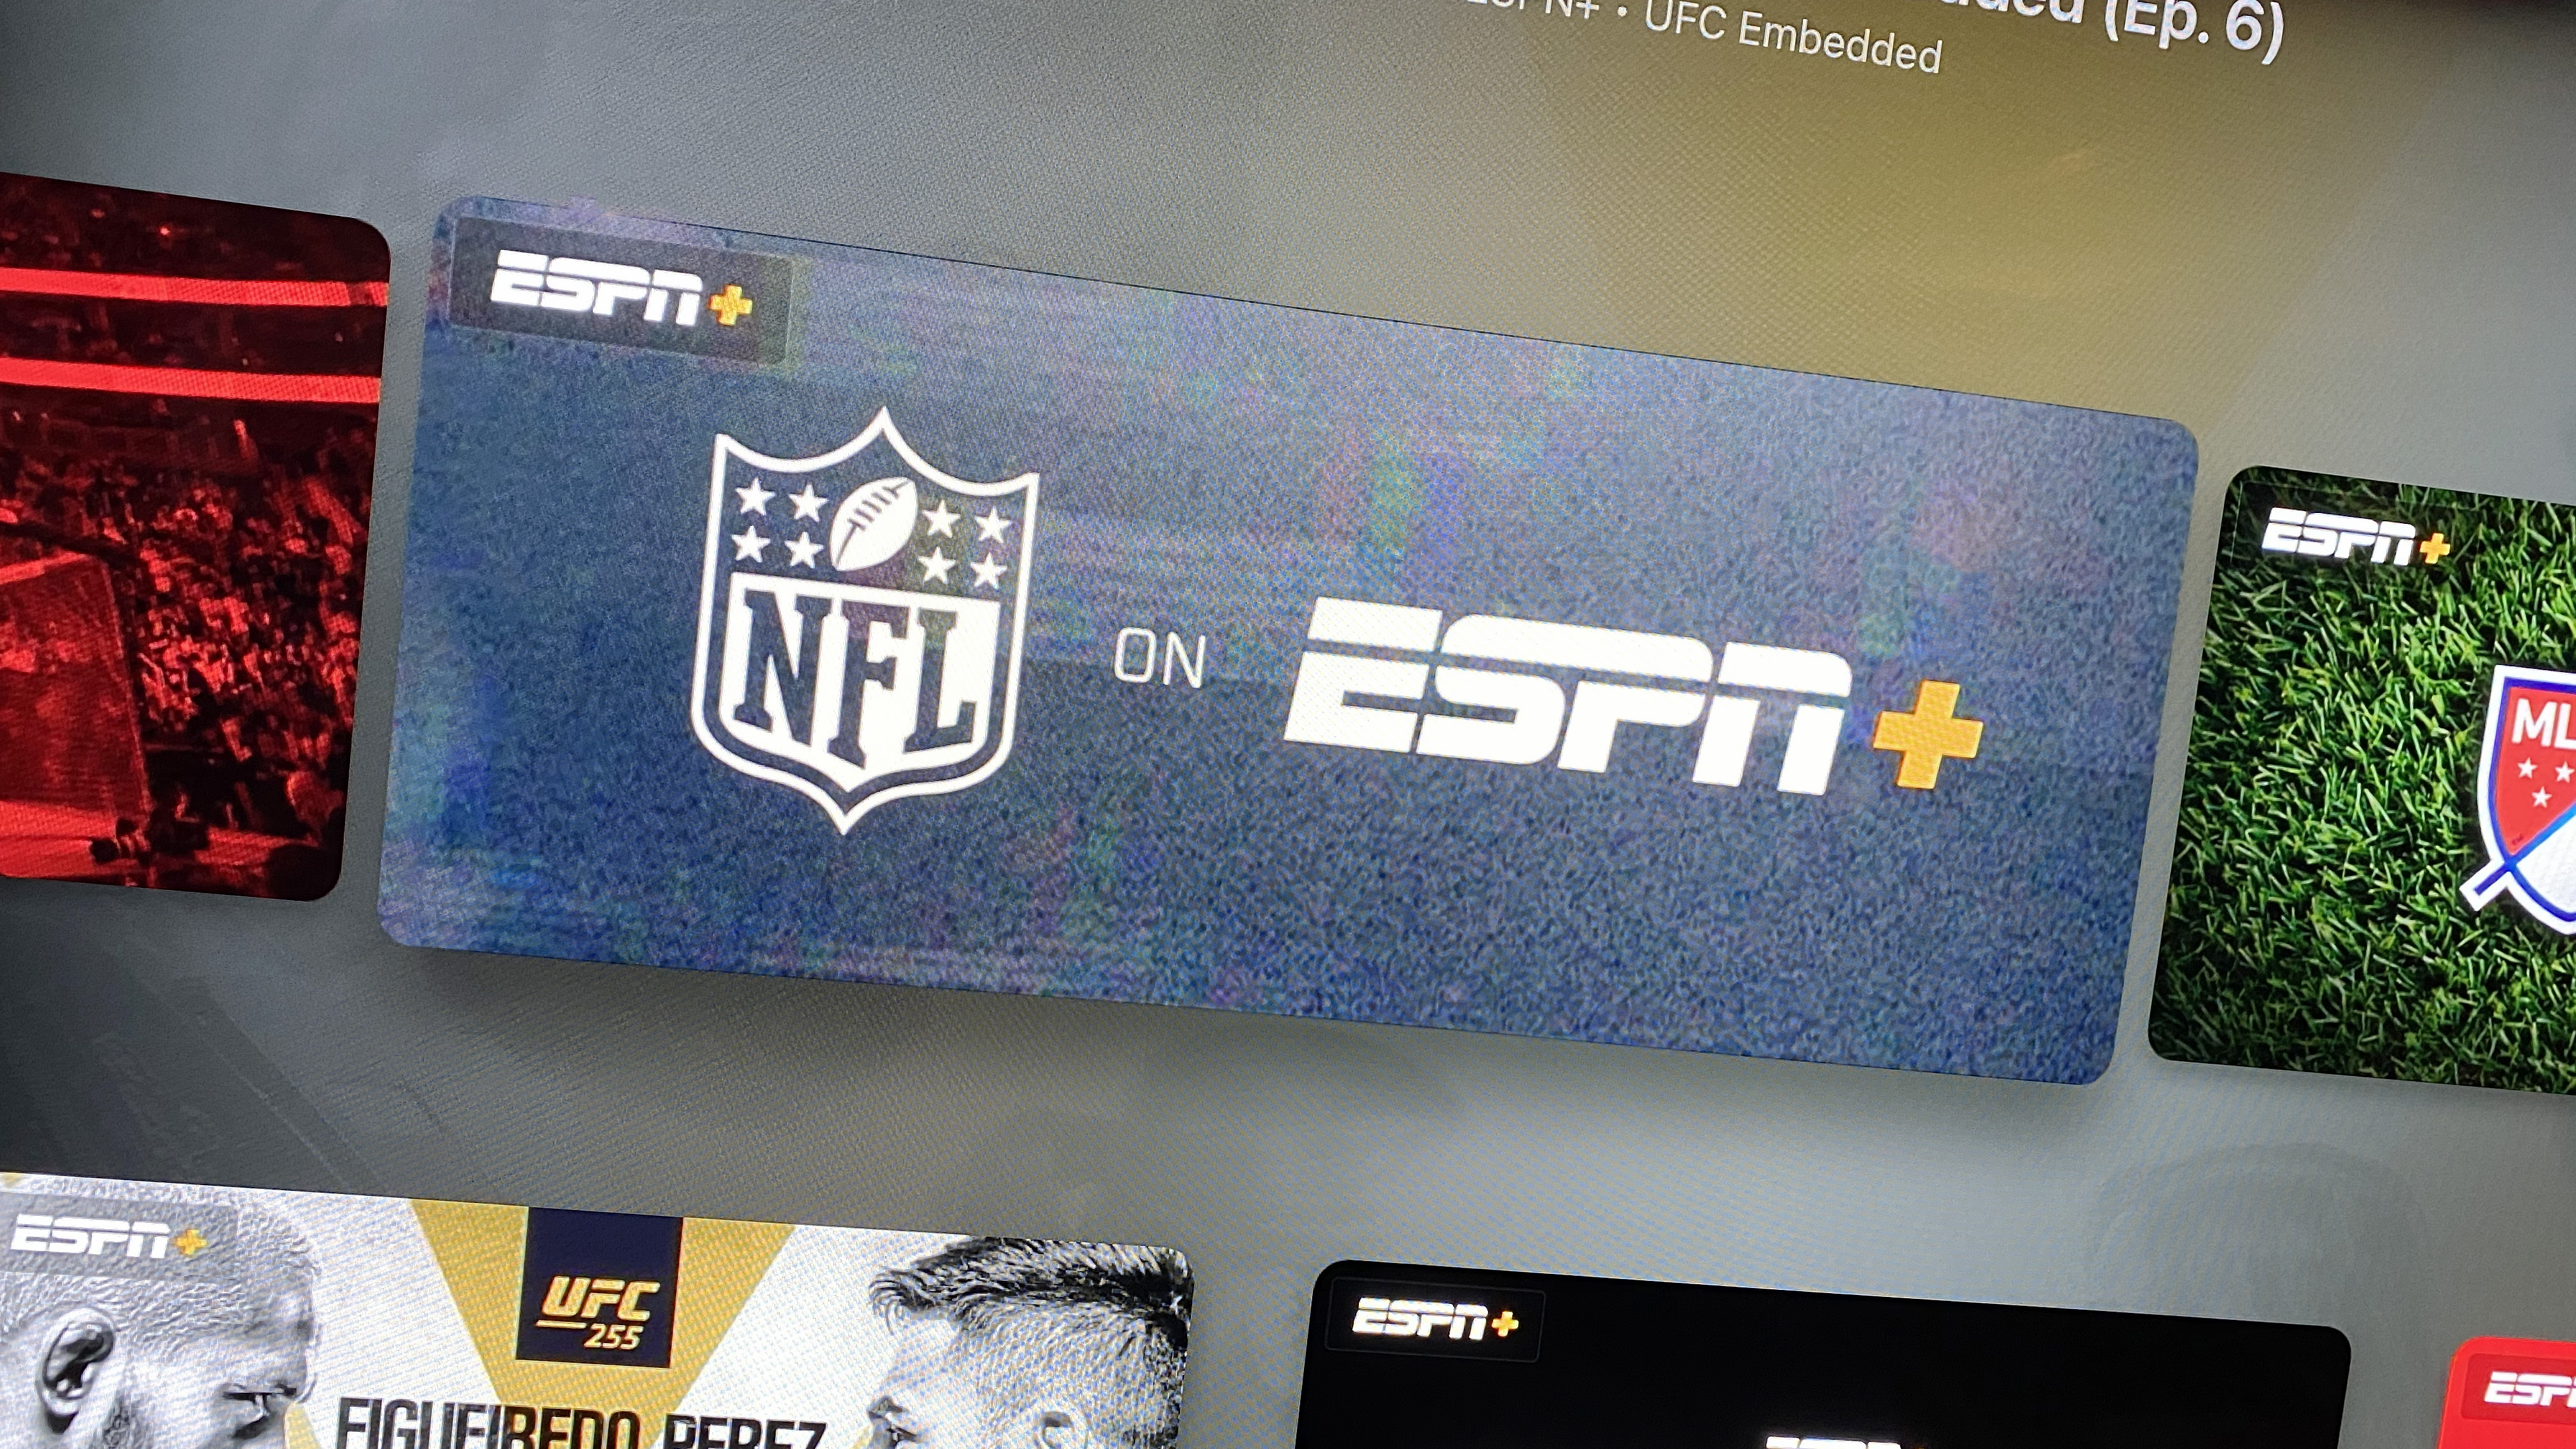 ESPN Plus will get to stream a single NFL game a year starting in 2022